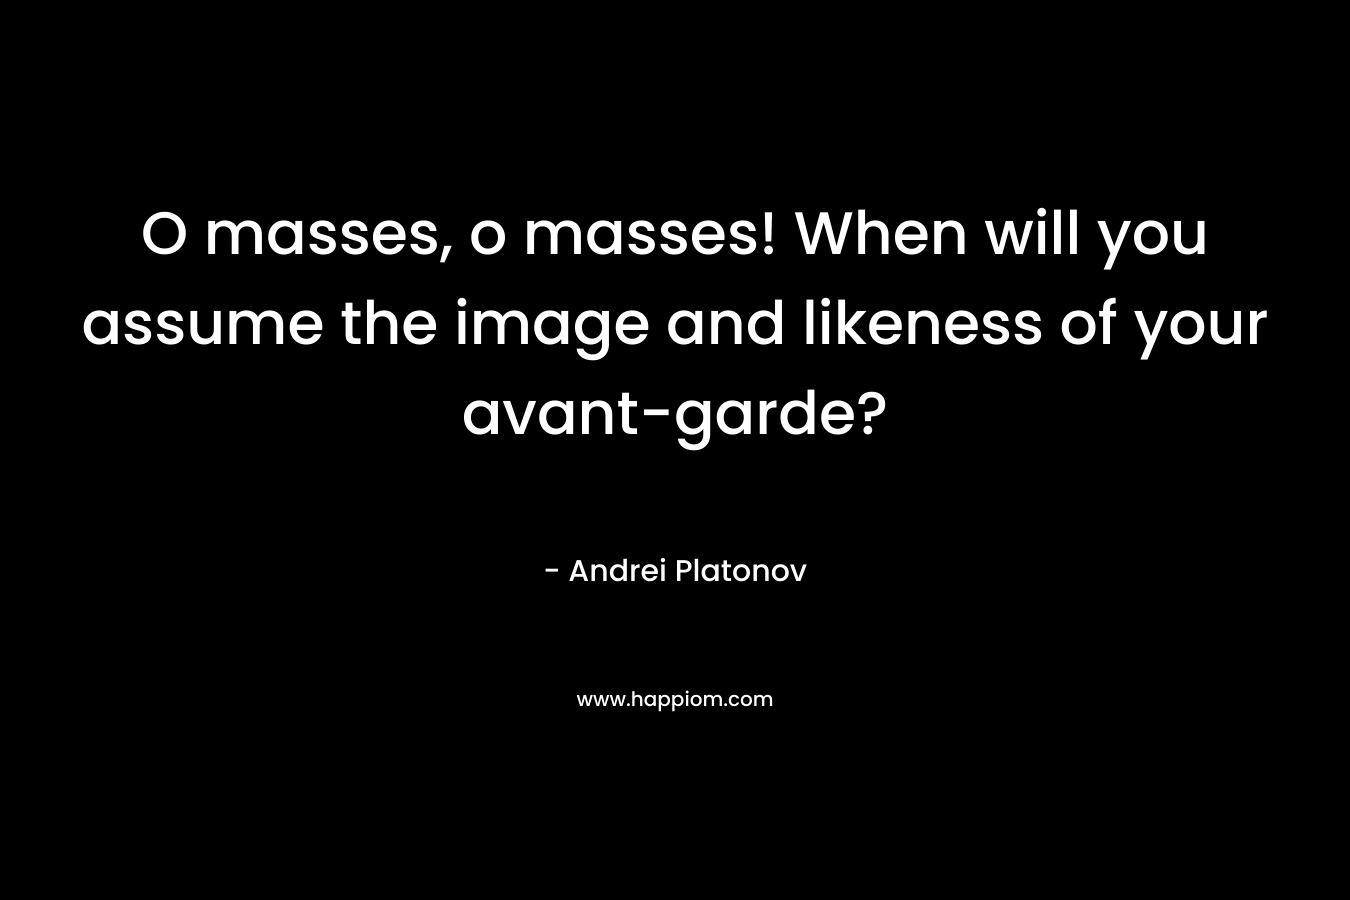 O masses, o masses! When will you assume the image and likeness of your avant-garde? – Andrei Platonov